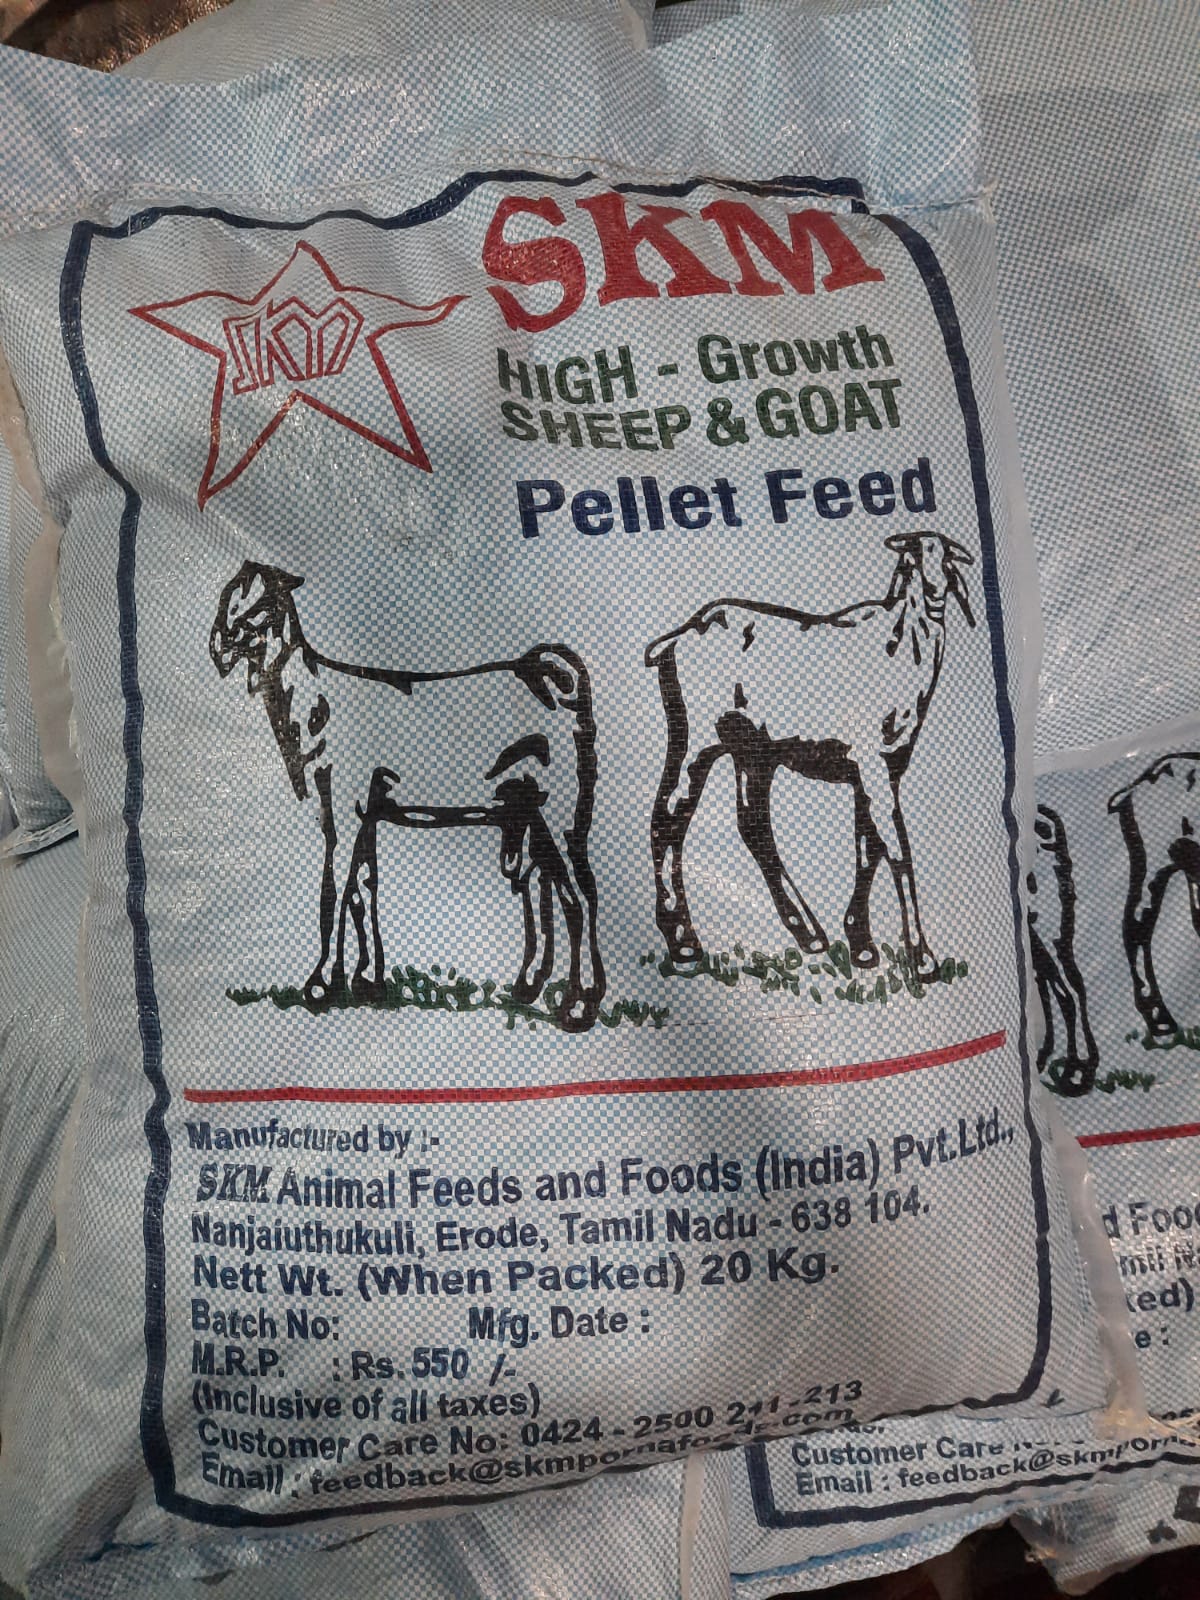 SKM High-Growth Sheep & Goat Pellet Feed Fooder for Sheep & Goat (20 Kg) -  EACH of 1 | Udaan - B2B Buying for Retailers